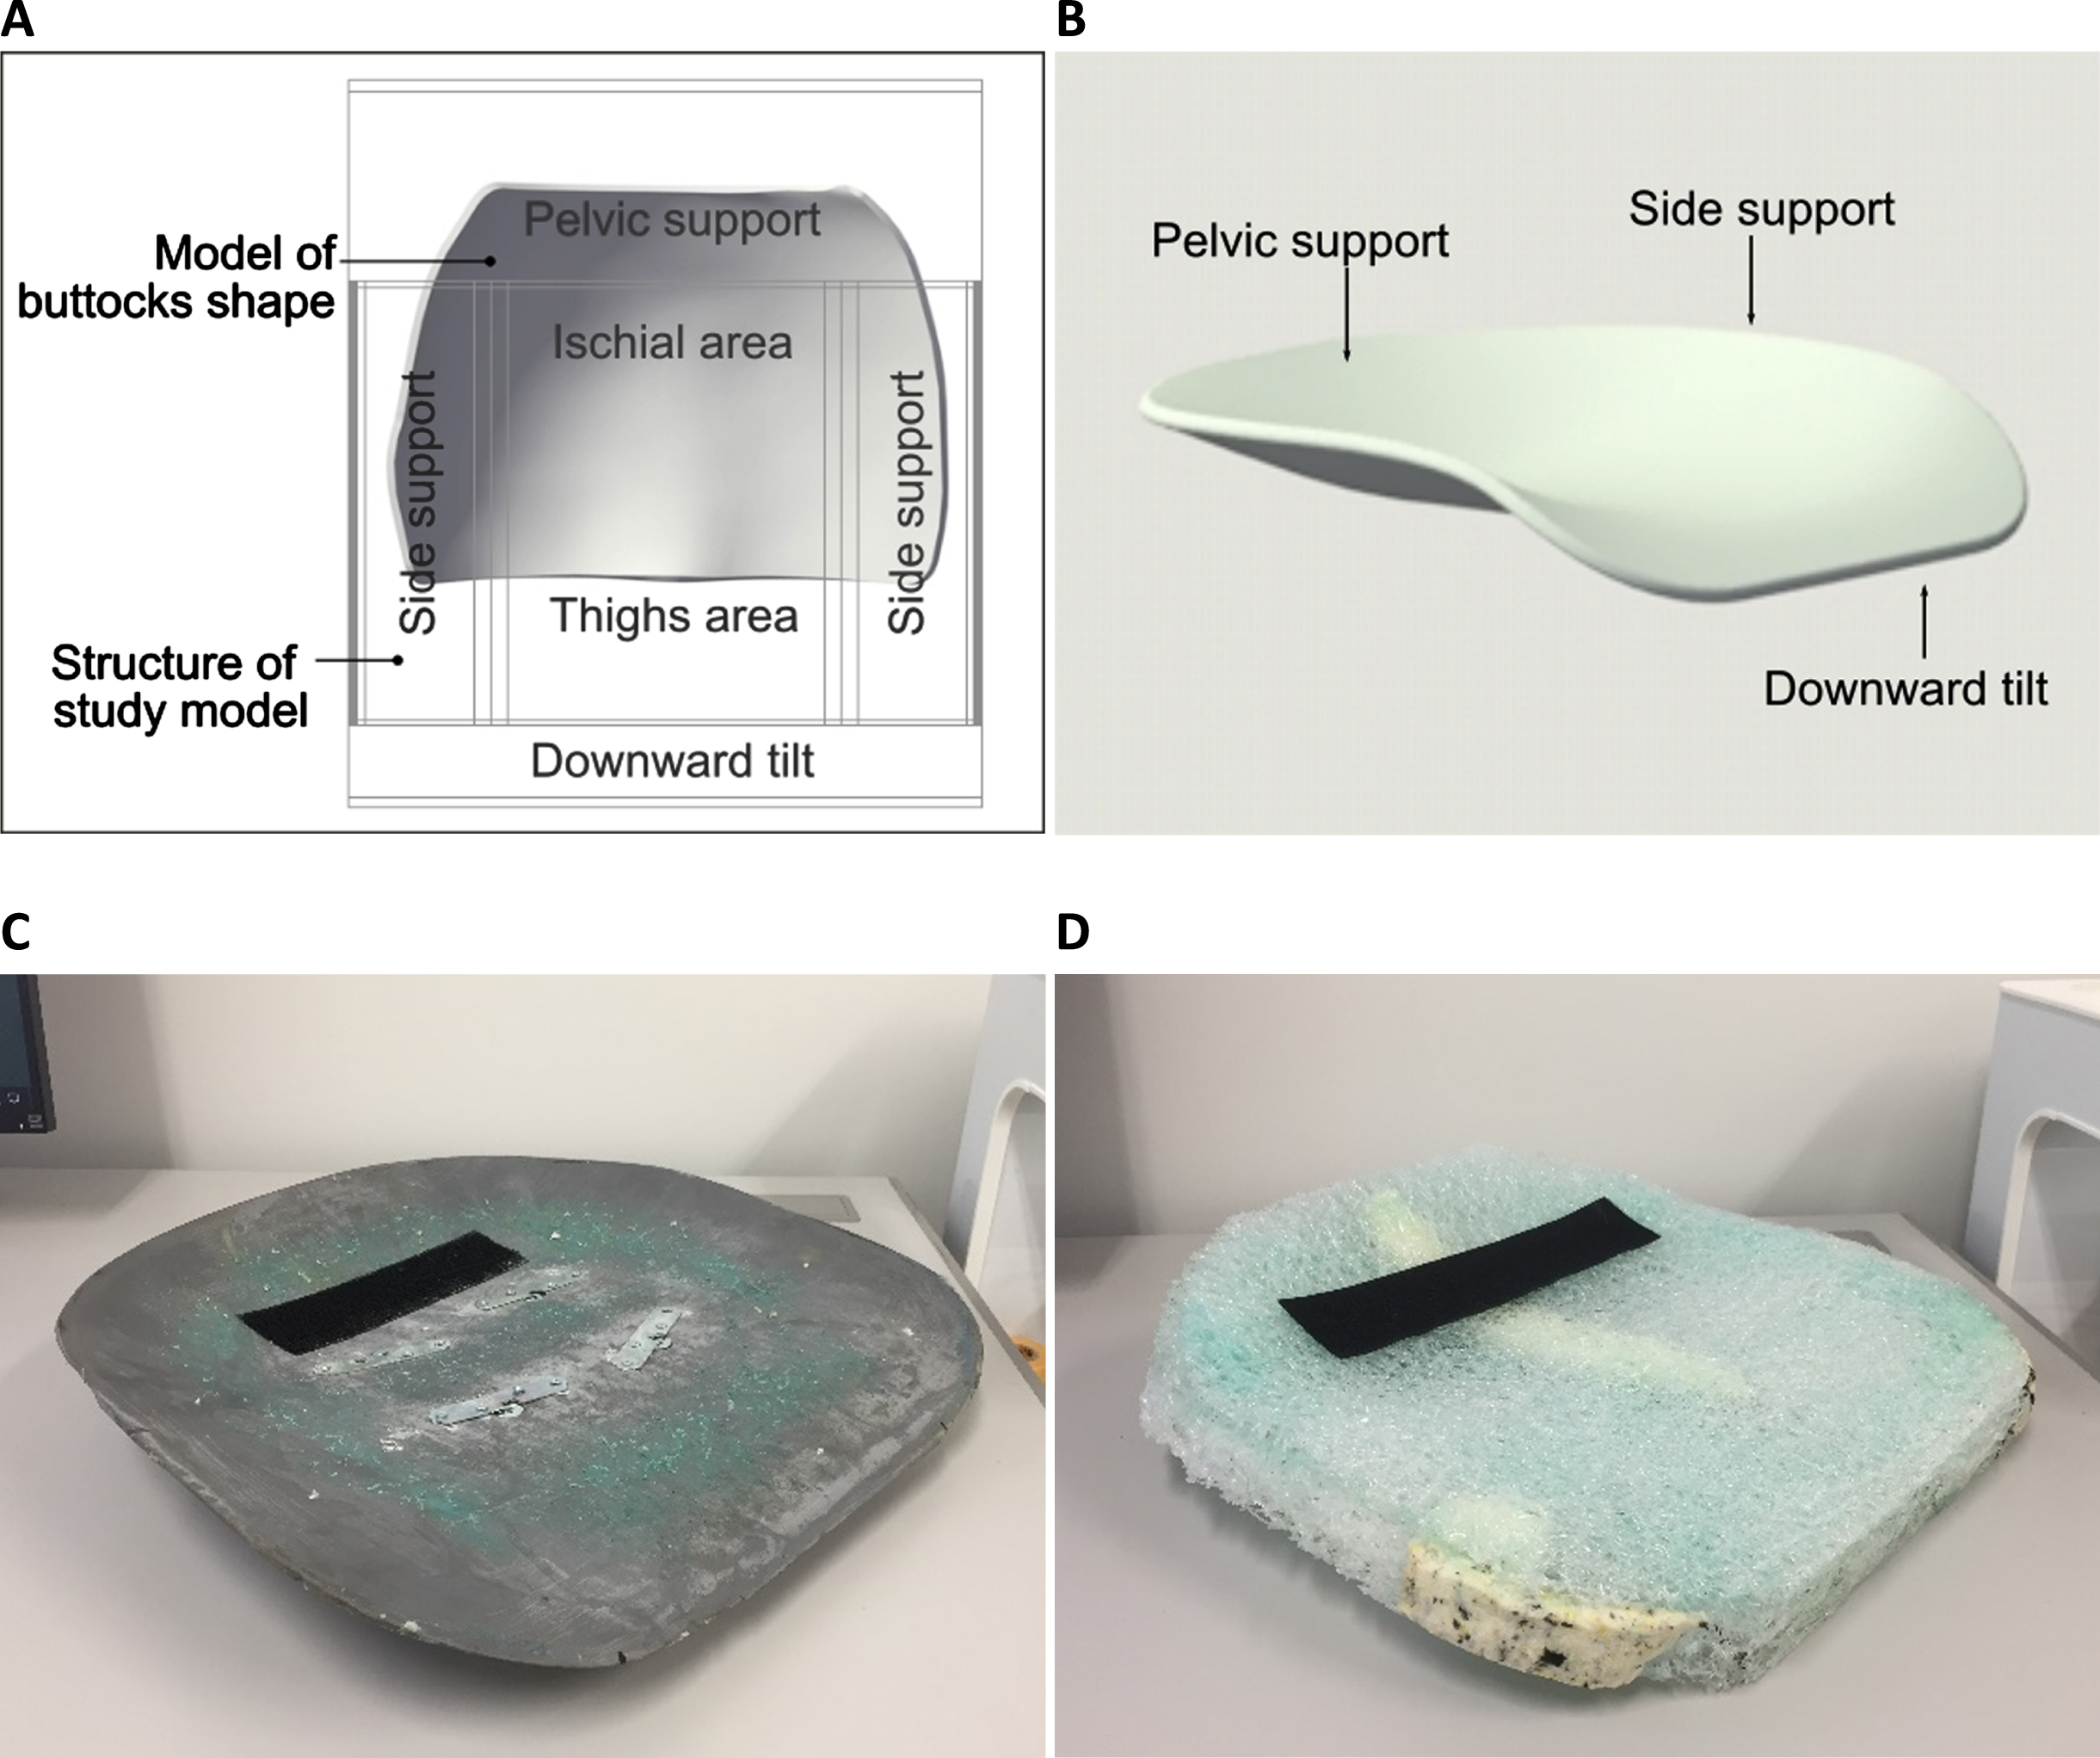 Prototyping of the seat surface. (A) Overlaid image of the first study model and a model of the buttocks shape. (B) 3D CAD seat shell. (C) Fiber-reinforced plastic seat shell. (D) Plastic coil cushion.